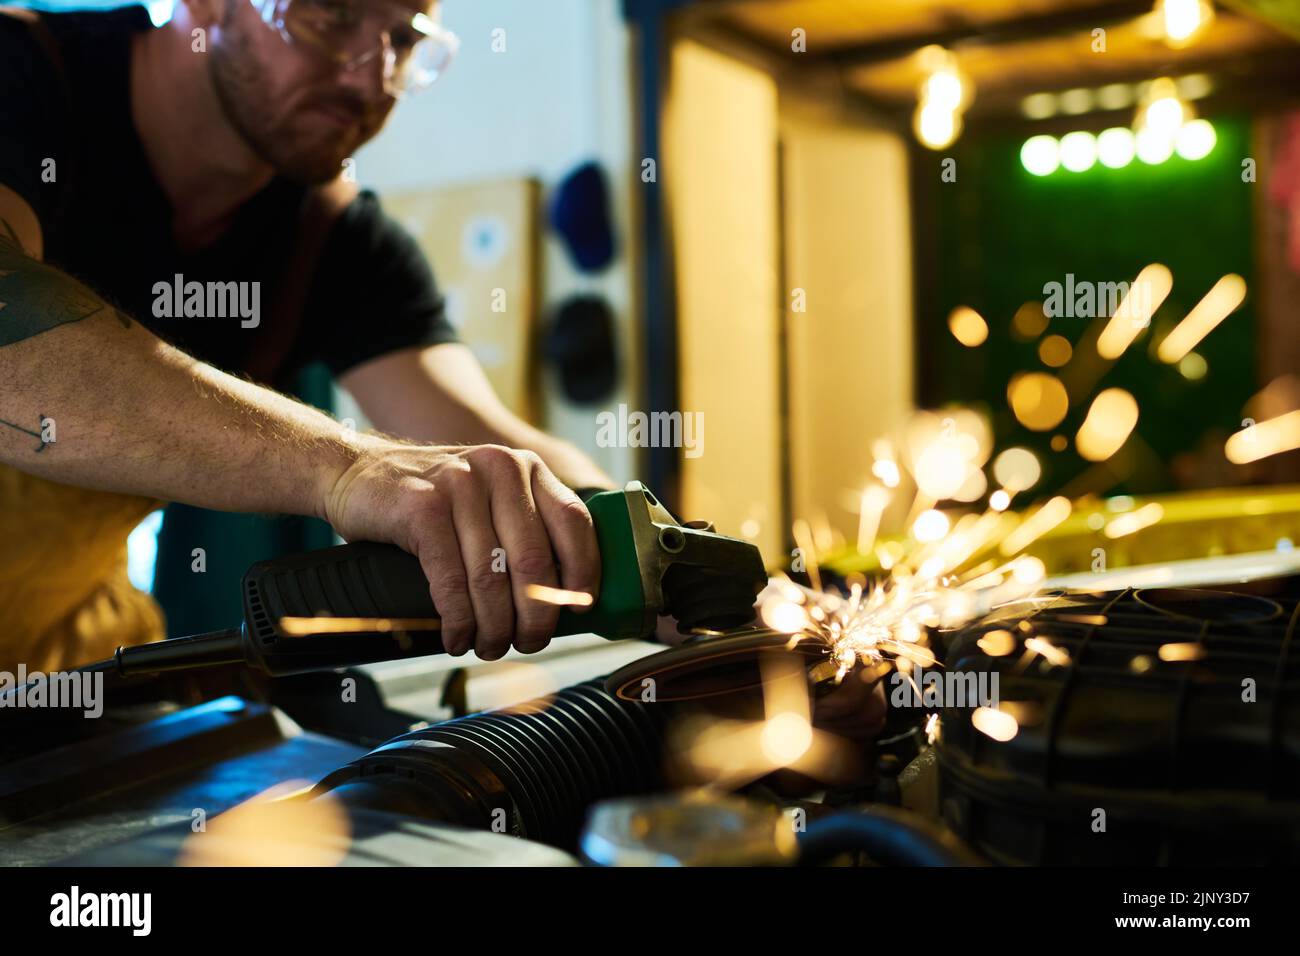 Young maintenance service worker with electric handtool grinding details of car engine while bending over open hood during work Stock Photo